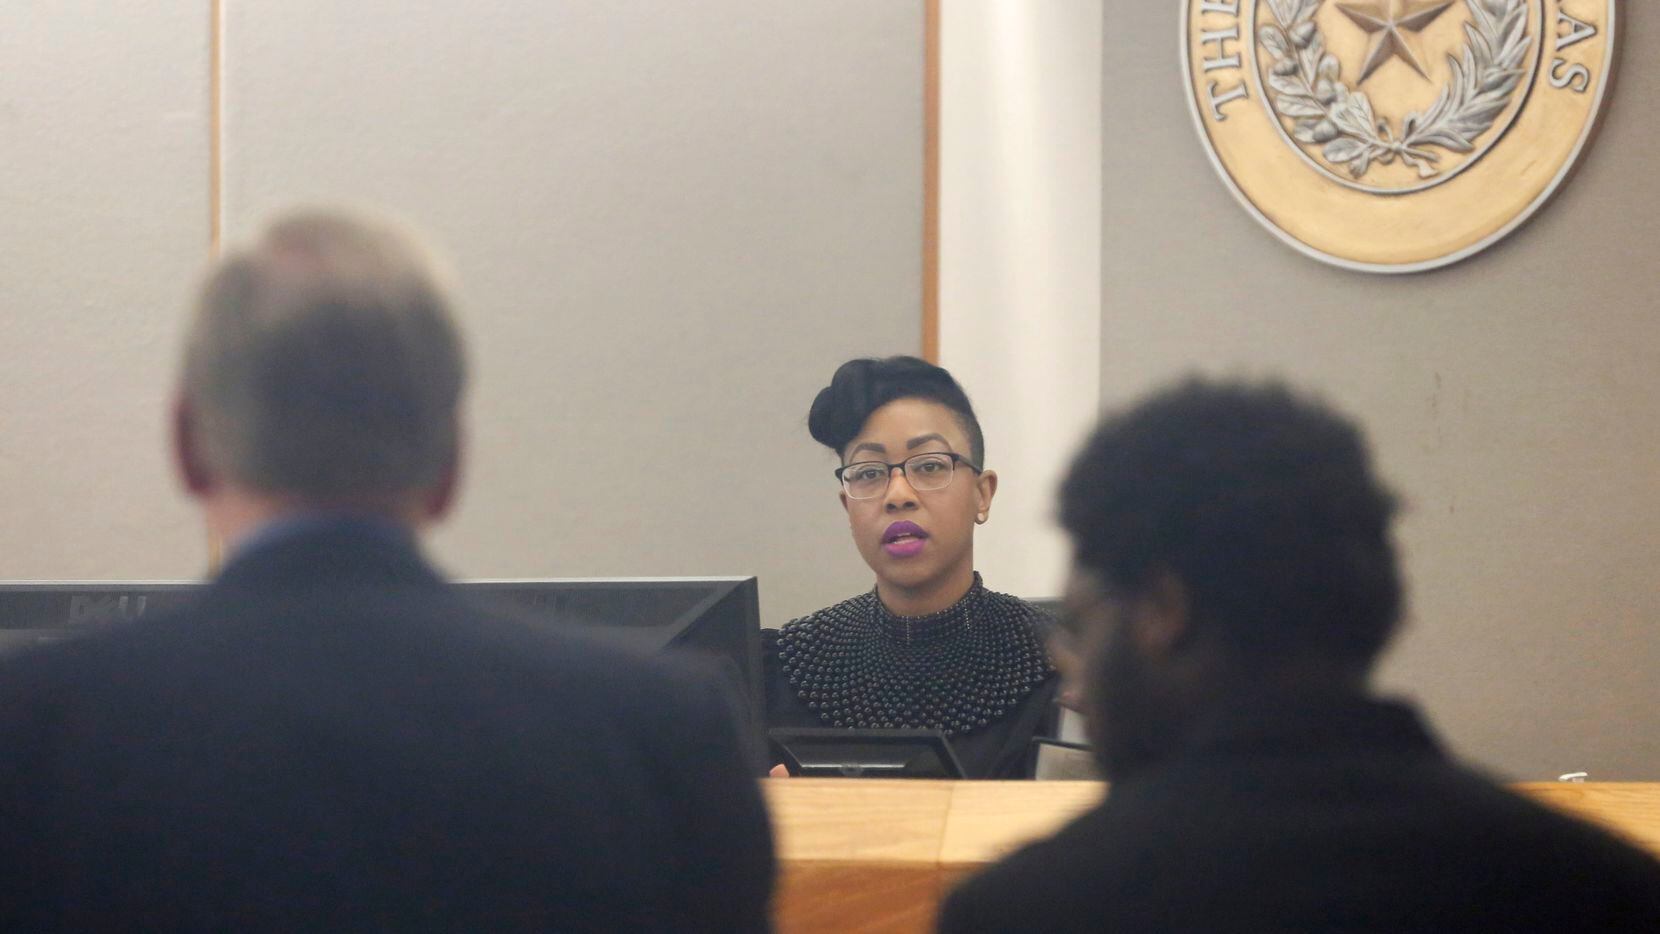 Judge Amber Givens-Davis listens as defense attornery Paul Johnson (left) speaks as Thomas Johnson (right) listens during the second day of his murder trial at Frank Crowley Courts Building in Dallas on Tuesday, April 30, 2019. Johnson is accused of killing Dave Stevens, 53, who was on his daily run along White Rock Creek Trail back on October 12, 2015. (Vernon Bryant/The Dallas Morning News)